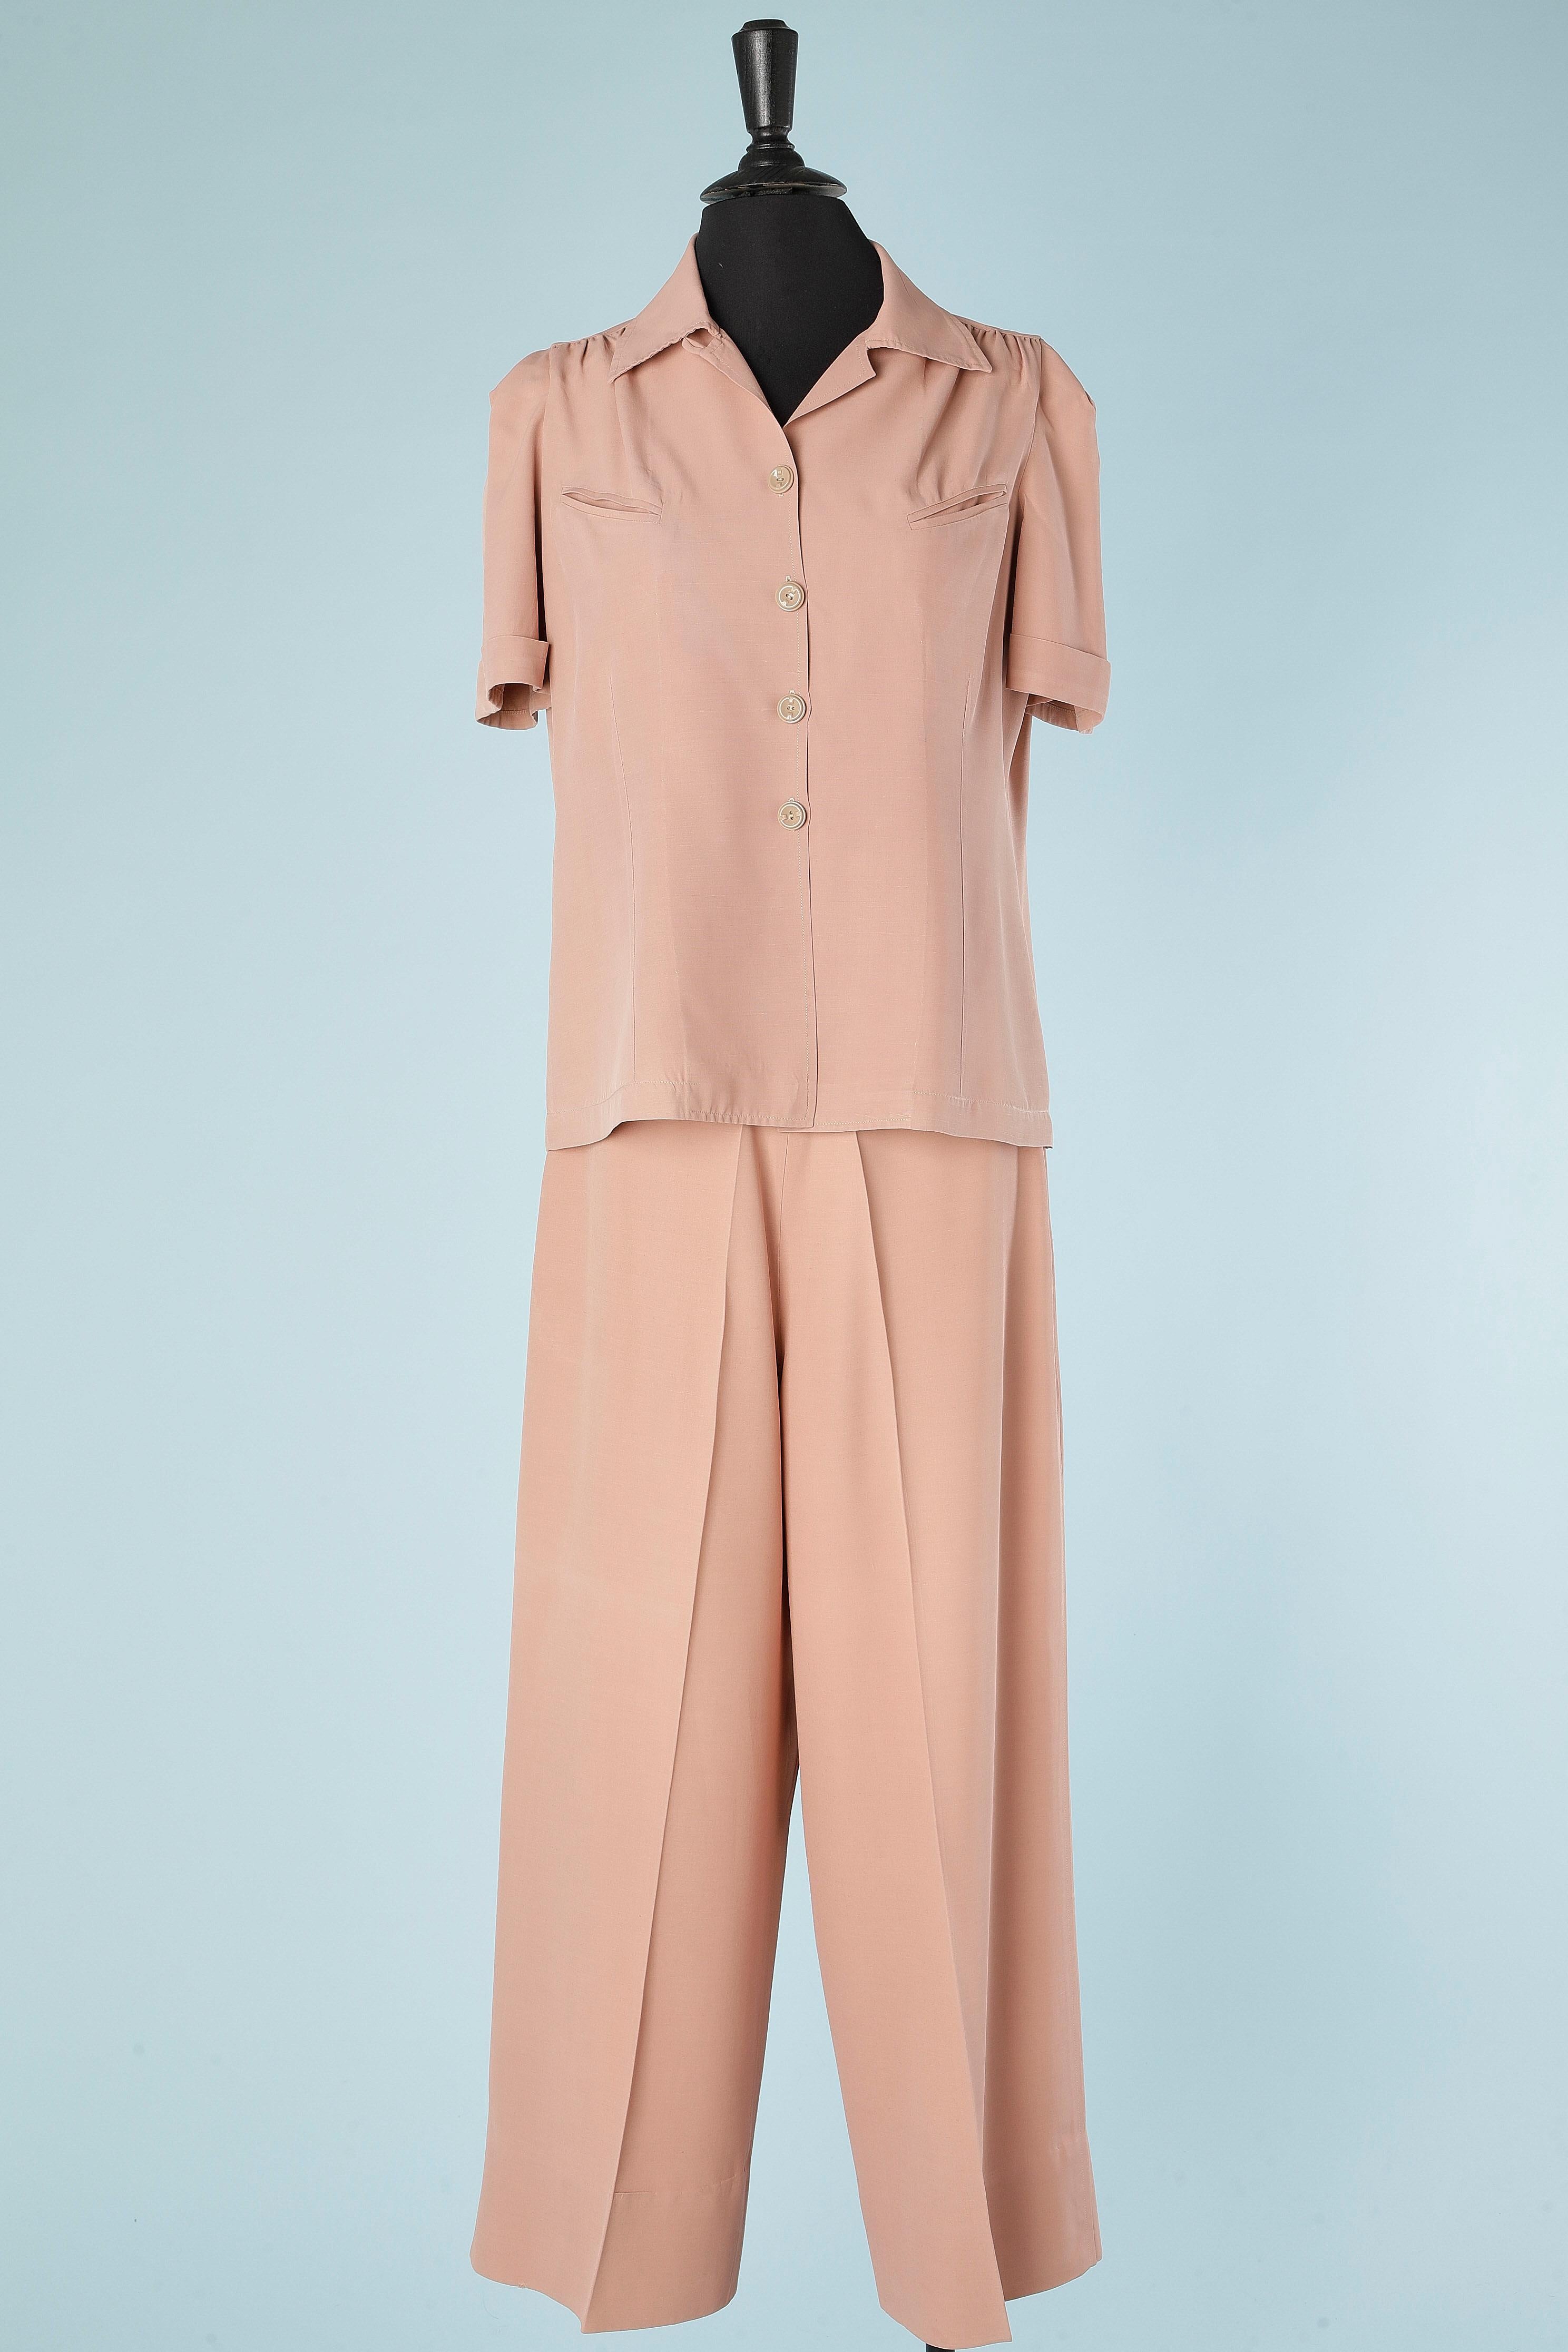 Pale pink rayon shirt and trouser ensemble. Belt-loop on the pant waist. 
Size L (shirt) and M (trouser) 